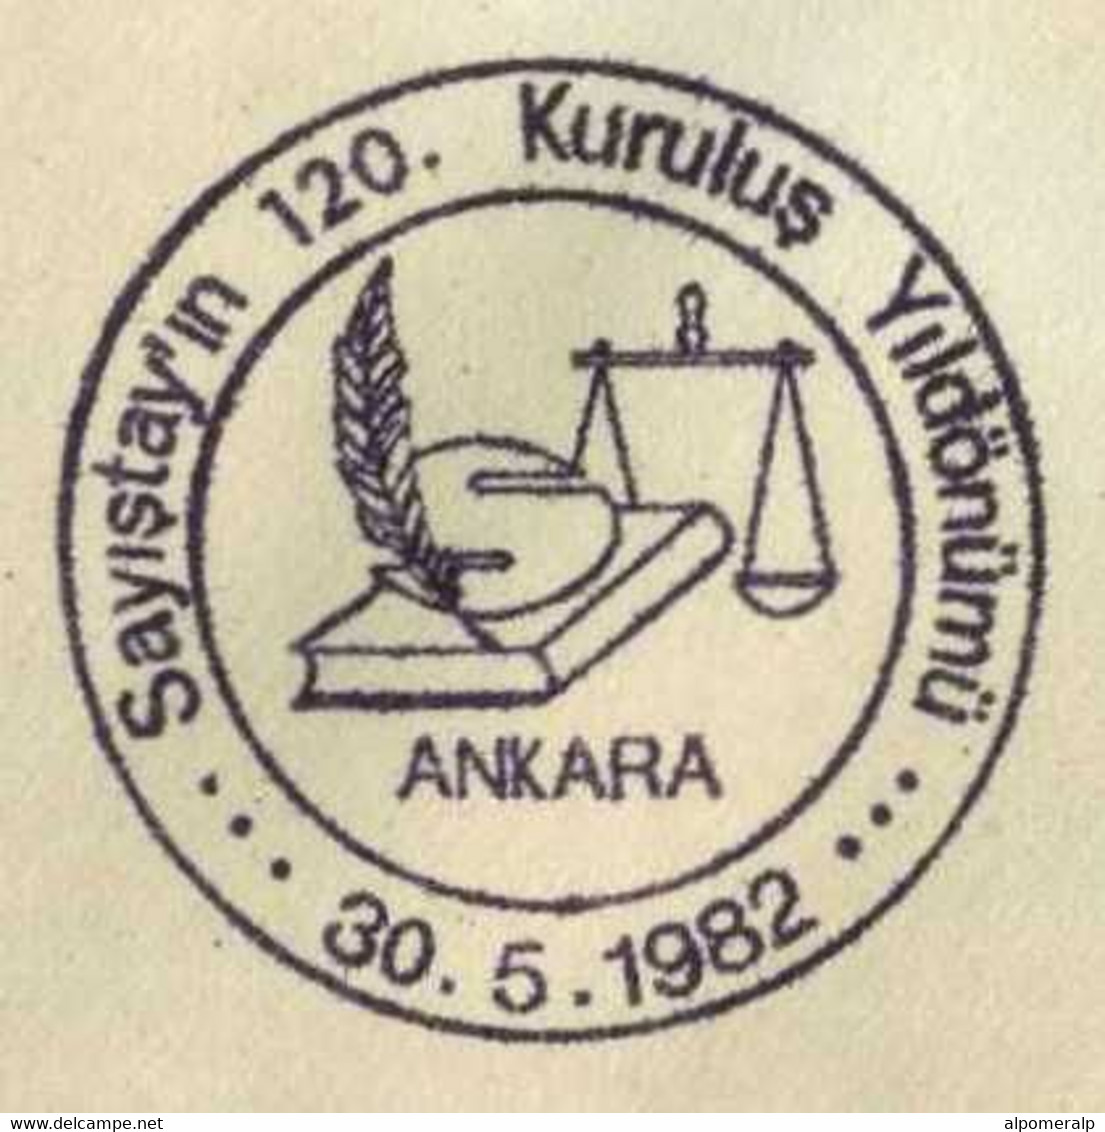 Türkiye 1982 120th Anniv. Of The Turkish Court Of Accounts | Law, Scales, Book, Pen, Special Cover - Lettres & Documents